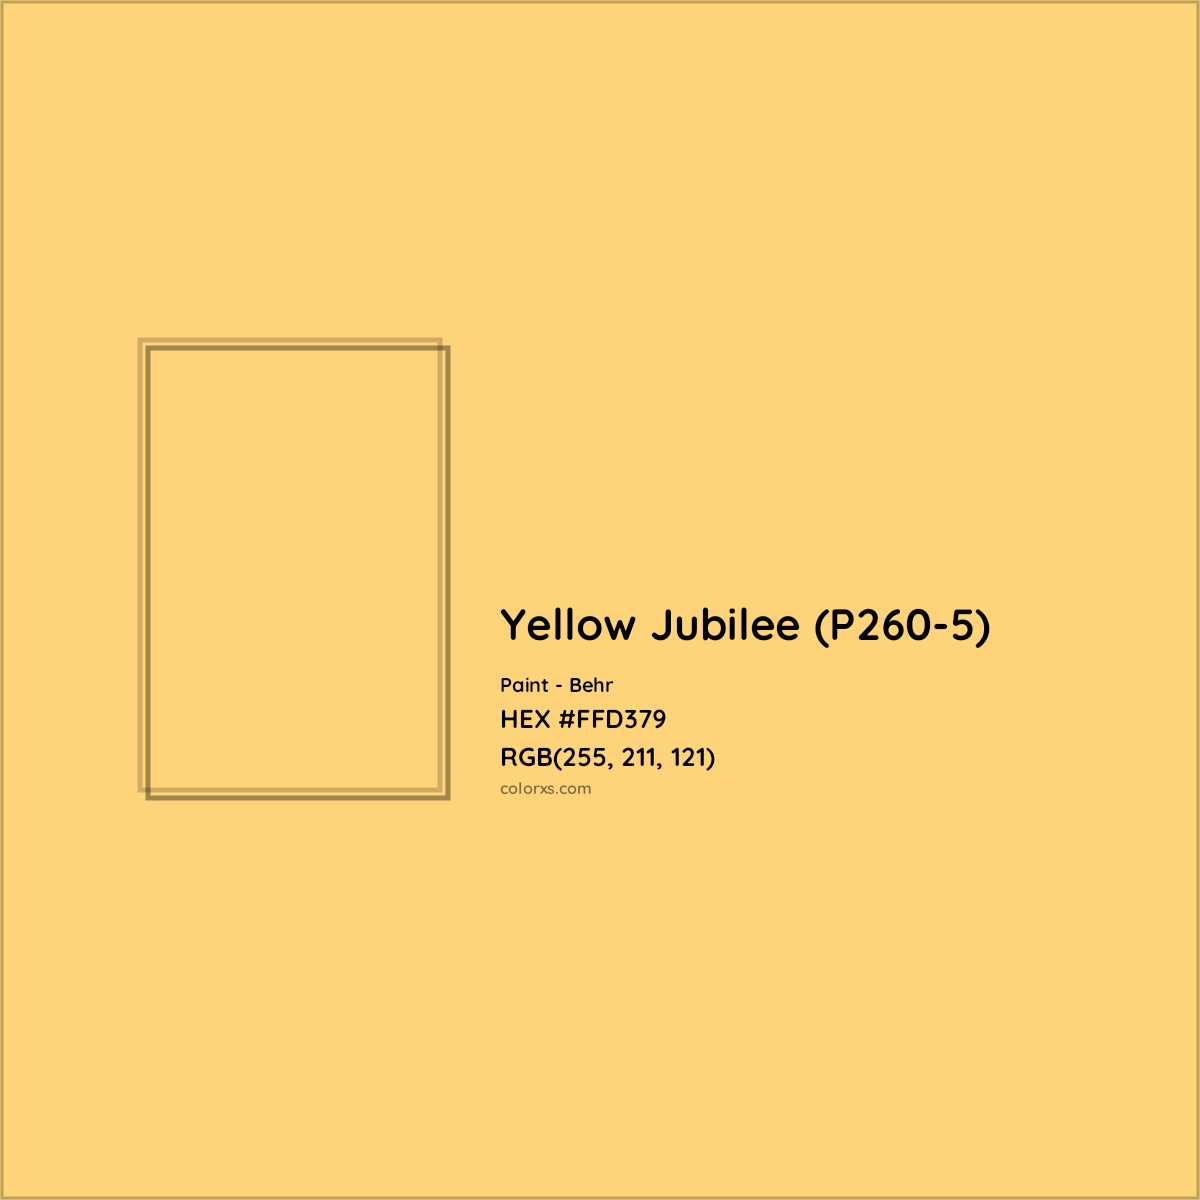 HEX #FFD379 Yellow Jubilee (P260-5) Paint Behr - Color Code